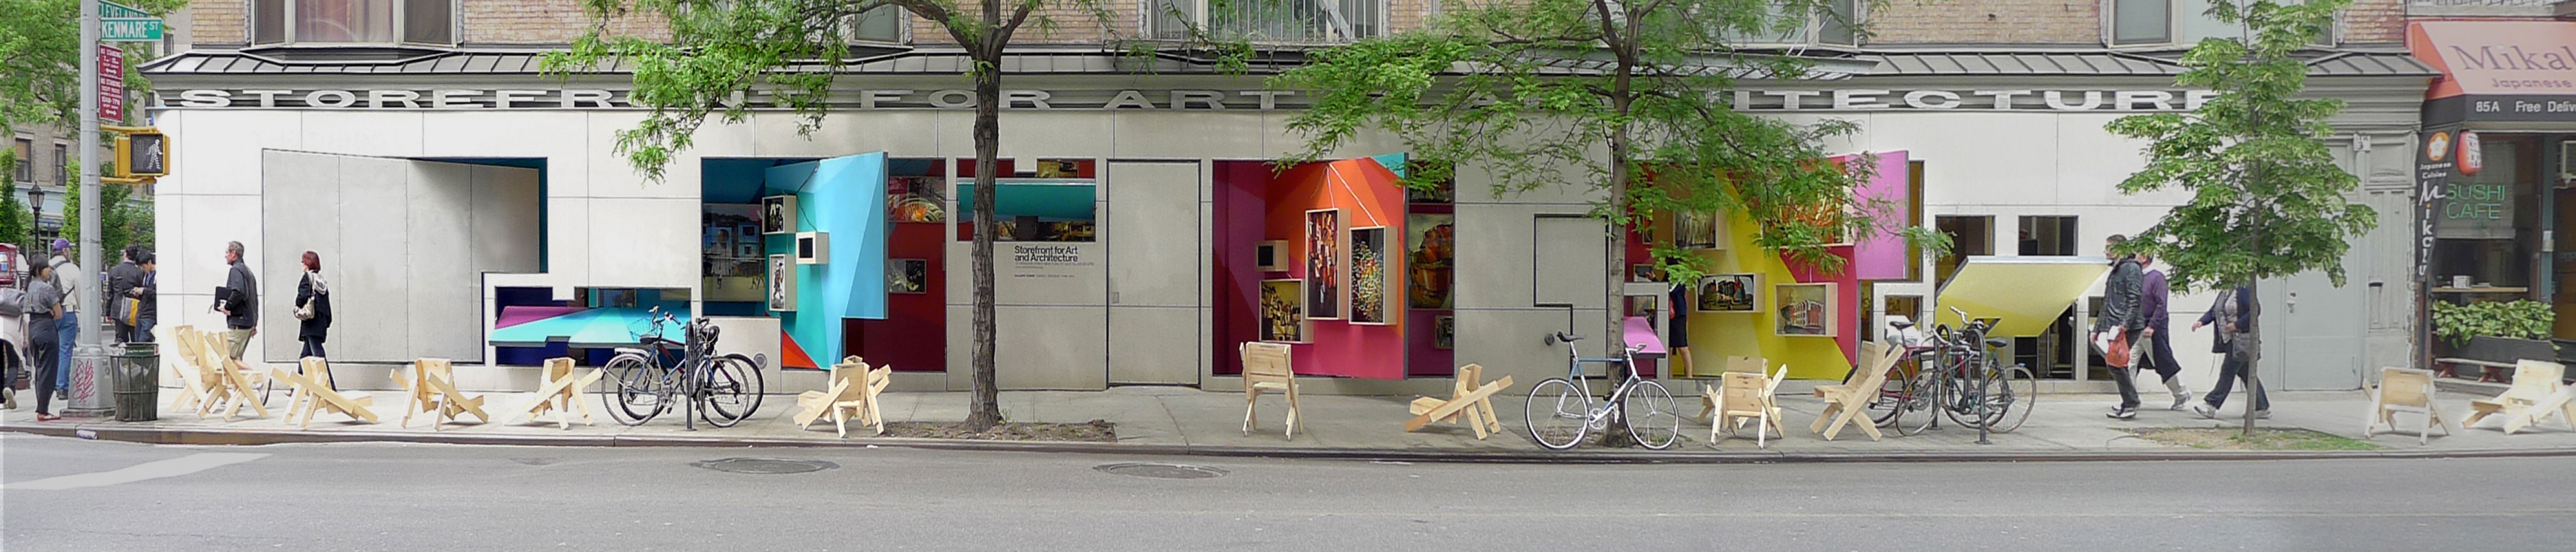 Storefront for Art and Architecture in New York. Eva Franch i Gilabert